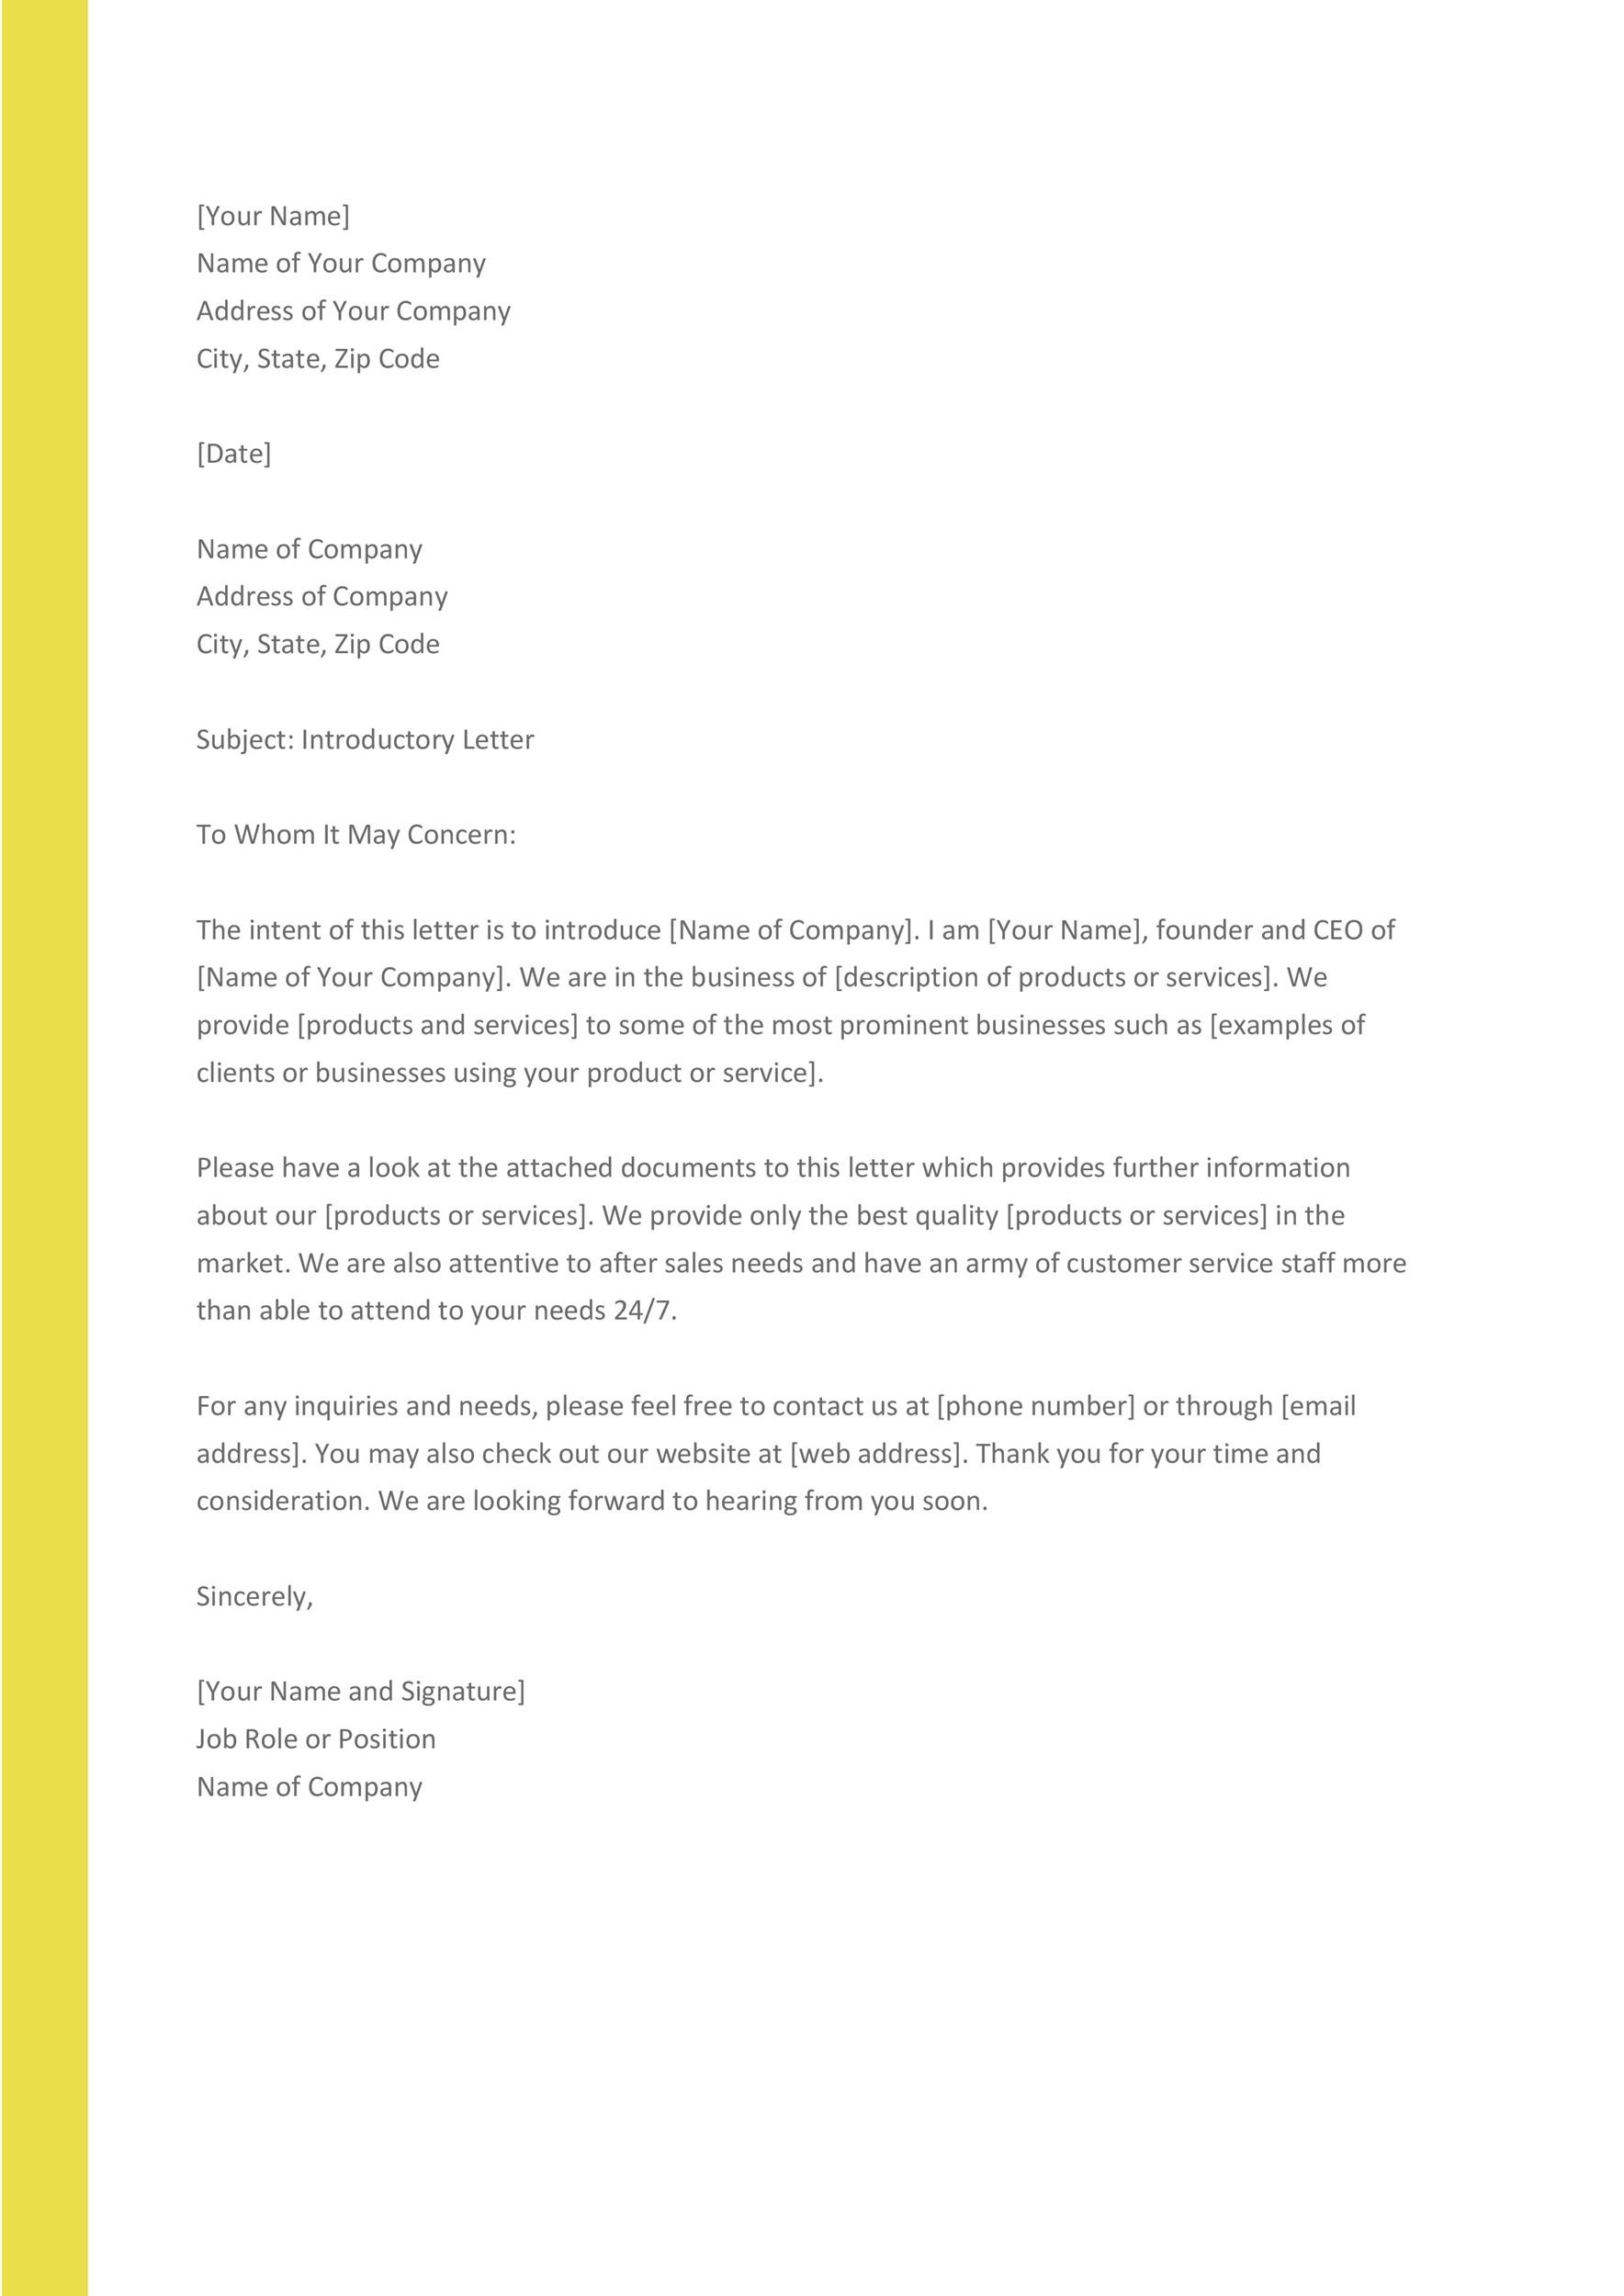 New Ceo Introduction Letter To Customers from templatelab.com